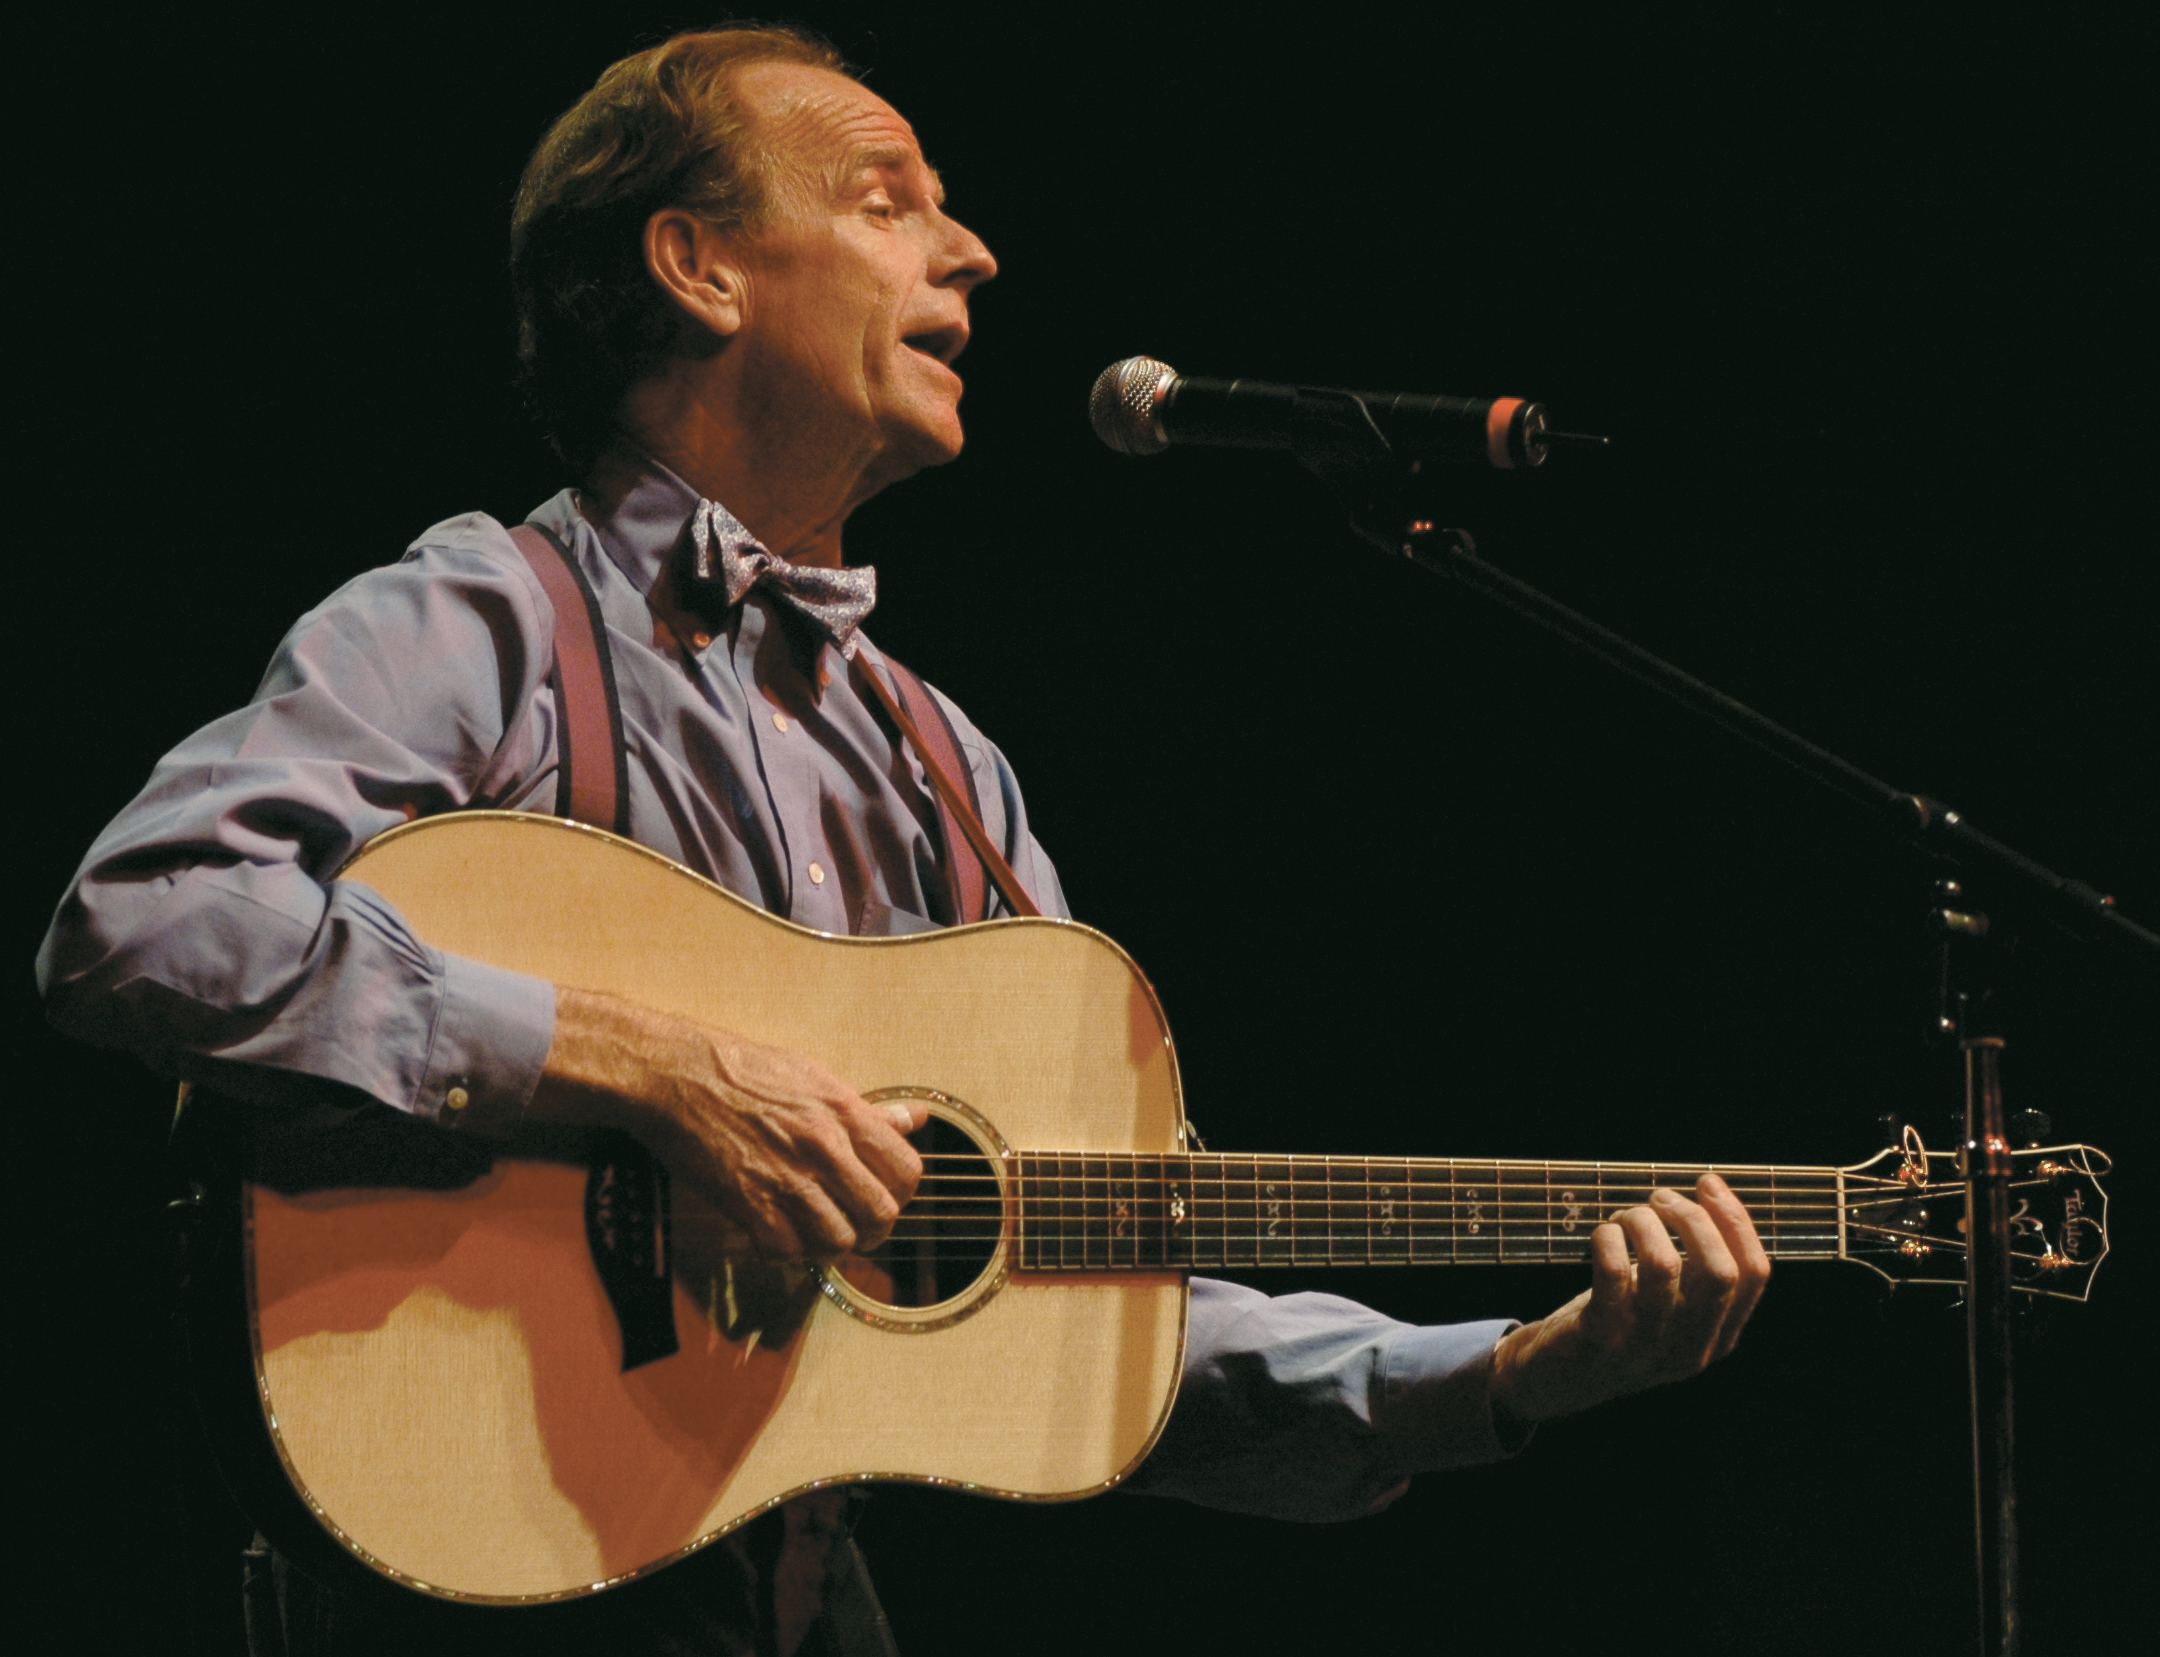 Livingston Taylor - Publicity Image - "Home for the Holidays Tour"